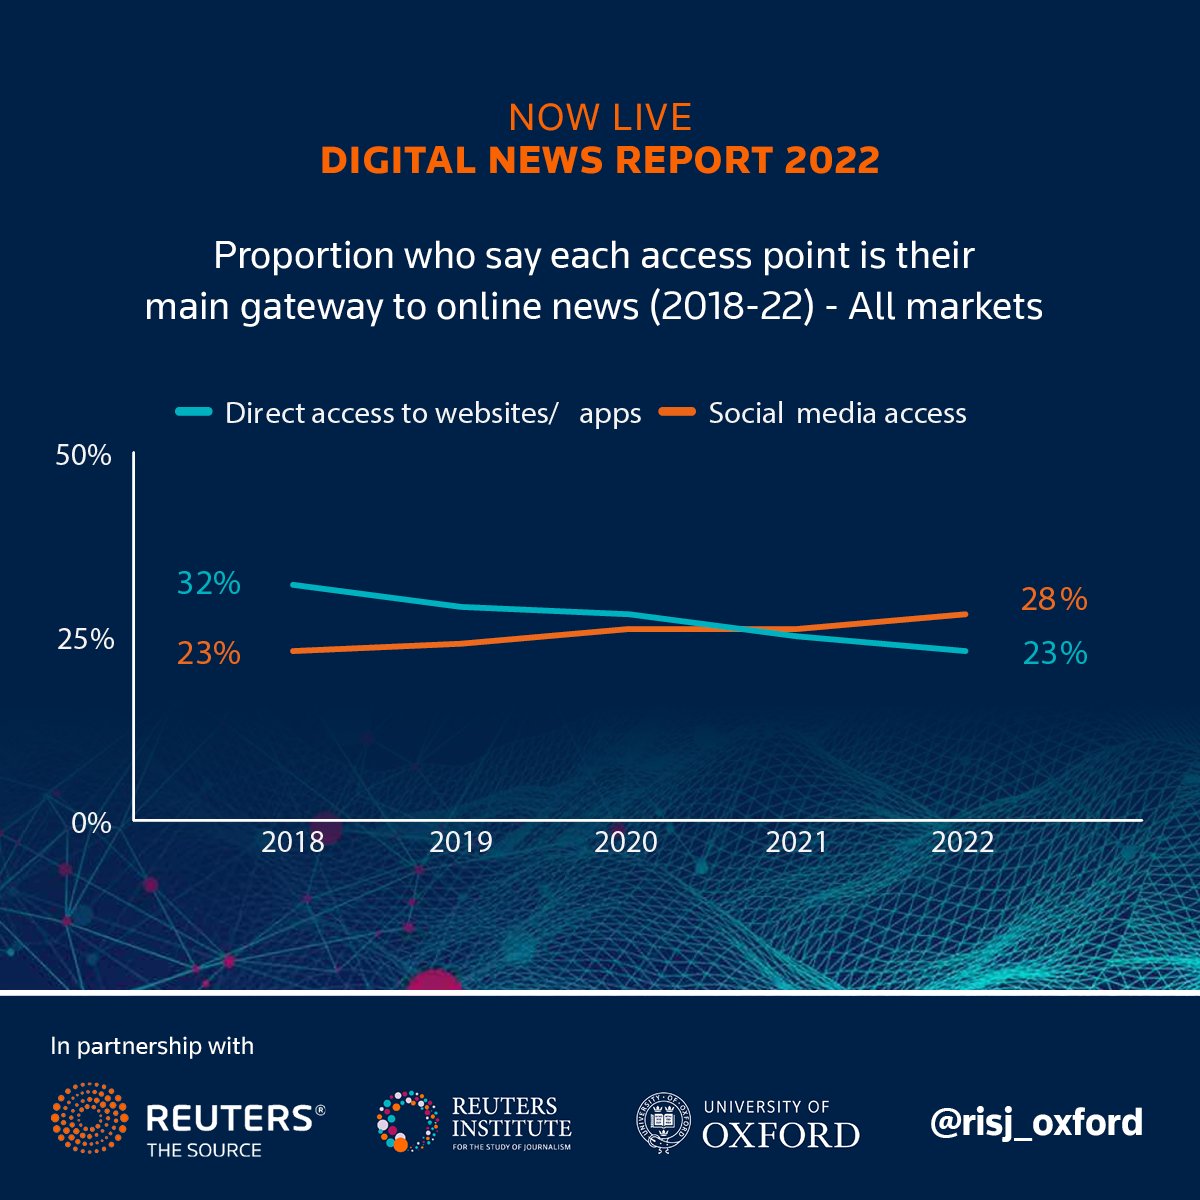 Social media topped direct access as users' main gateway to online news for the first time. There is...